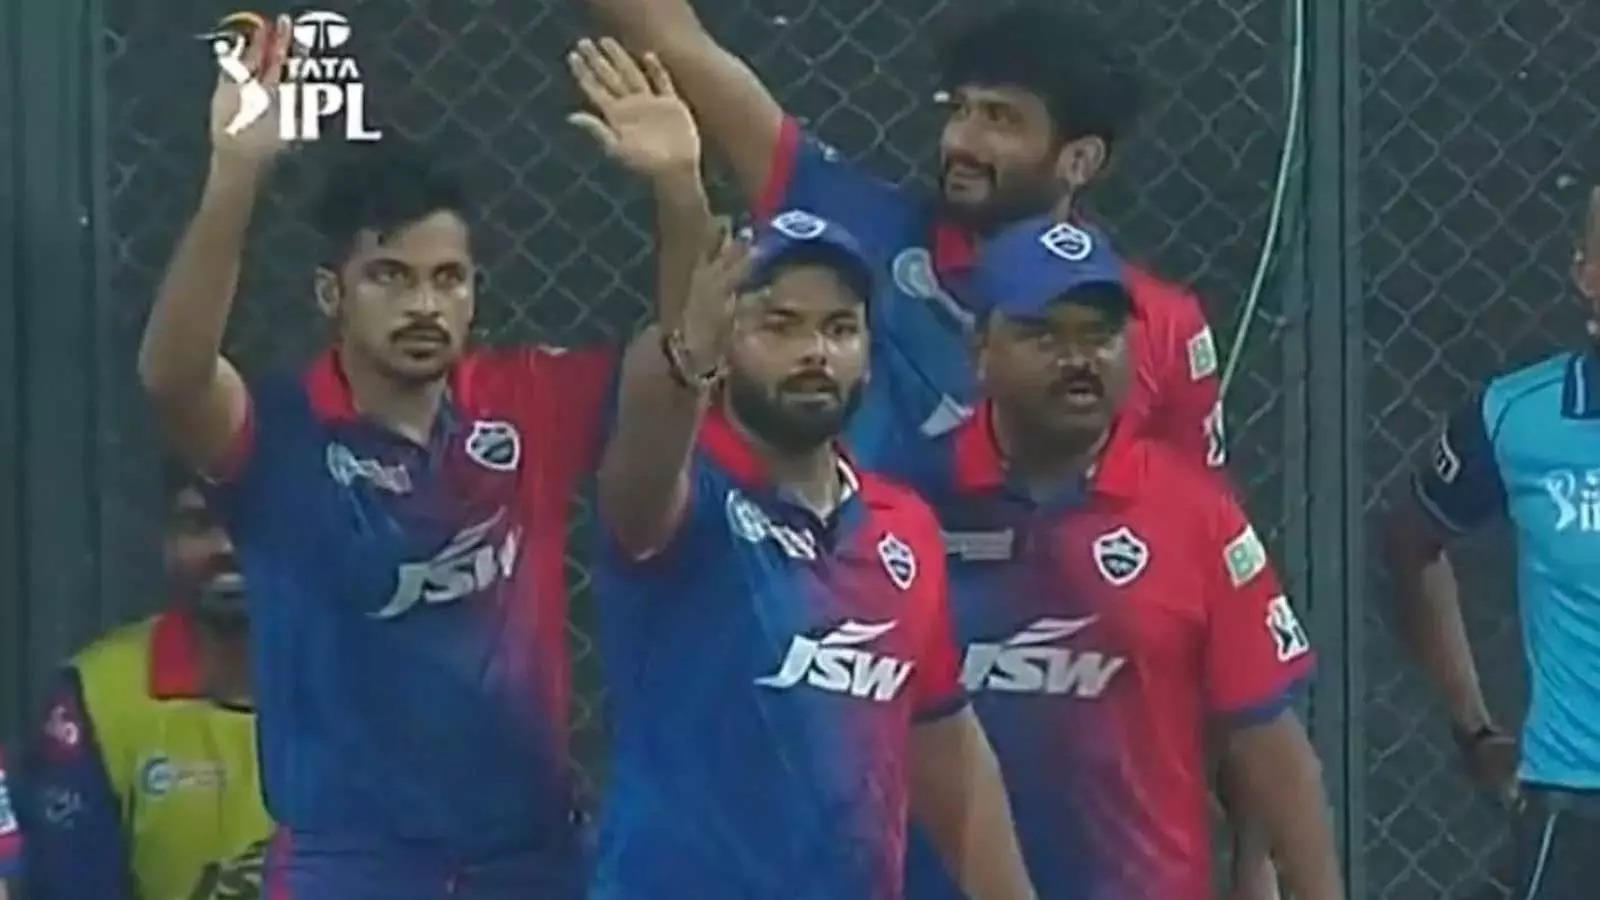 Rishabh Pant, Shardul Thakur and Pravin Amre have been fined by IPL